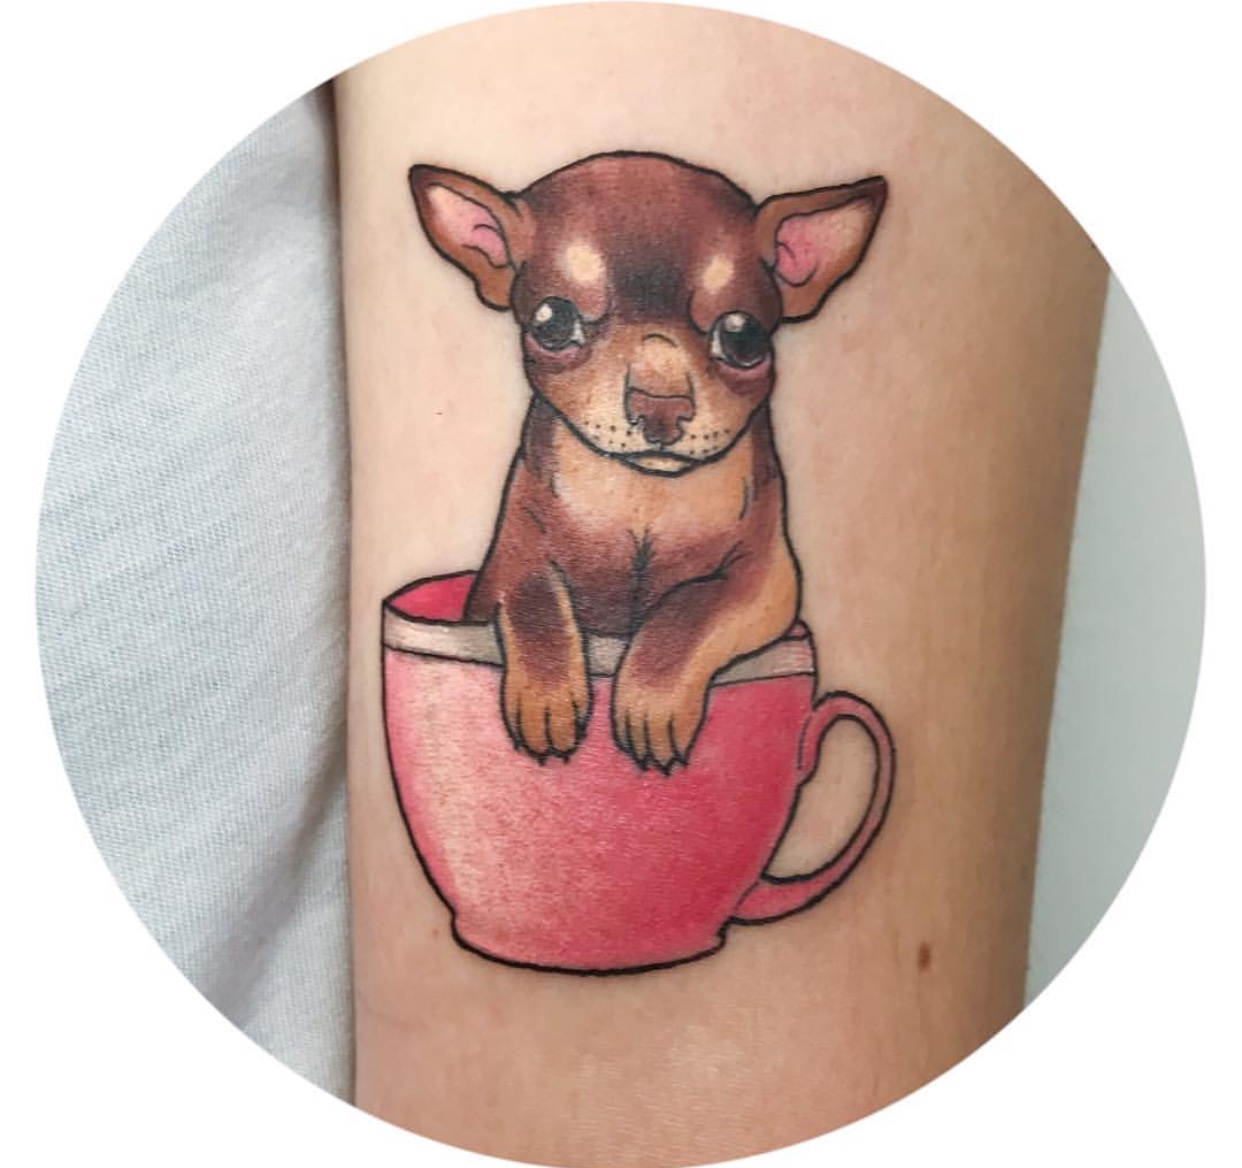 Chihuahua in a cup tattoo on the biceps